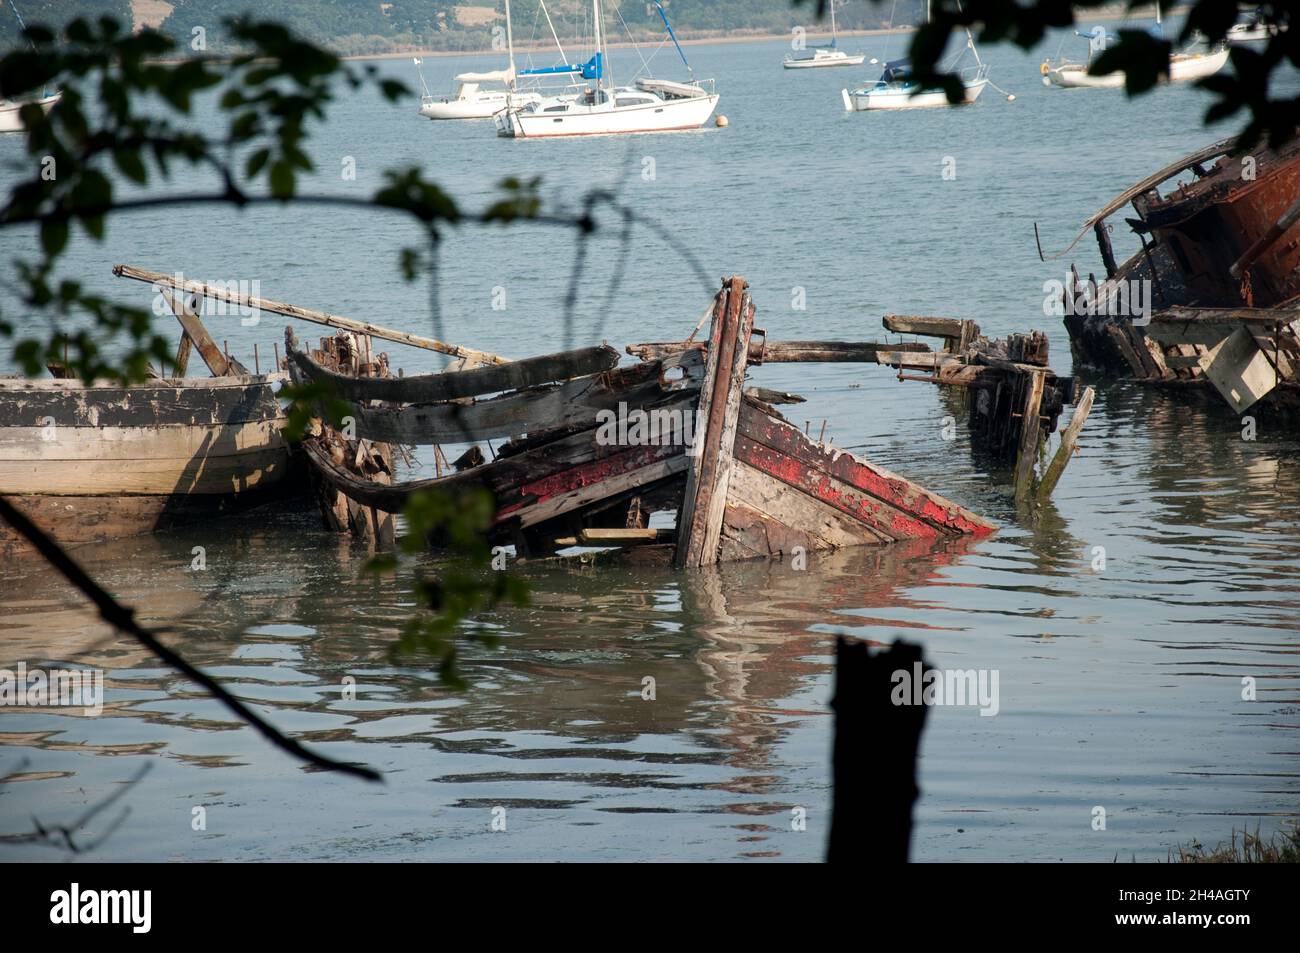 Ruined Boat on the River Orwell at Pin Mill, Suffolk, UK. Yachts in the background. Stock Photo